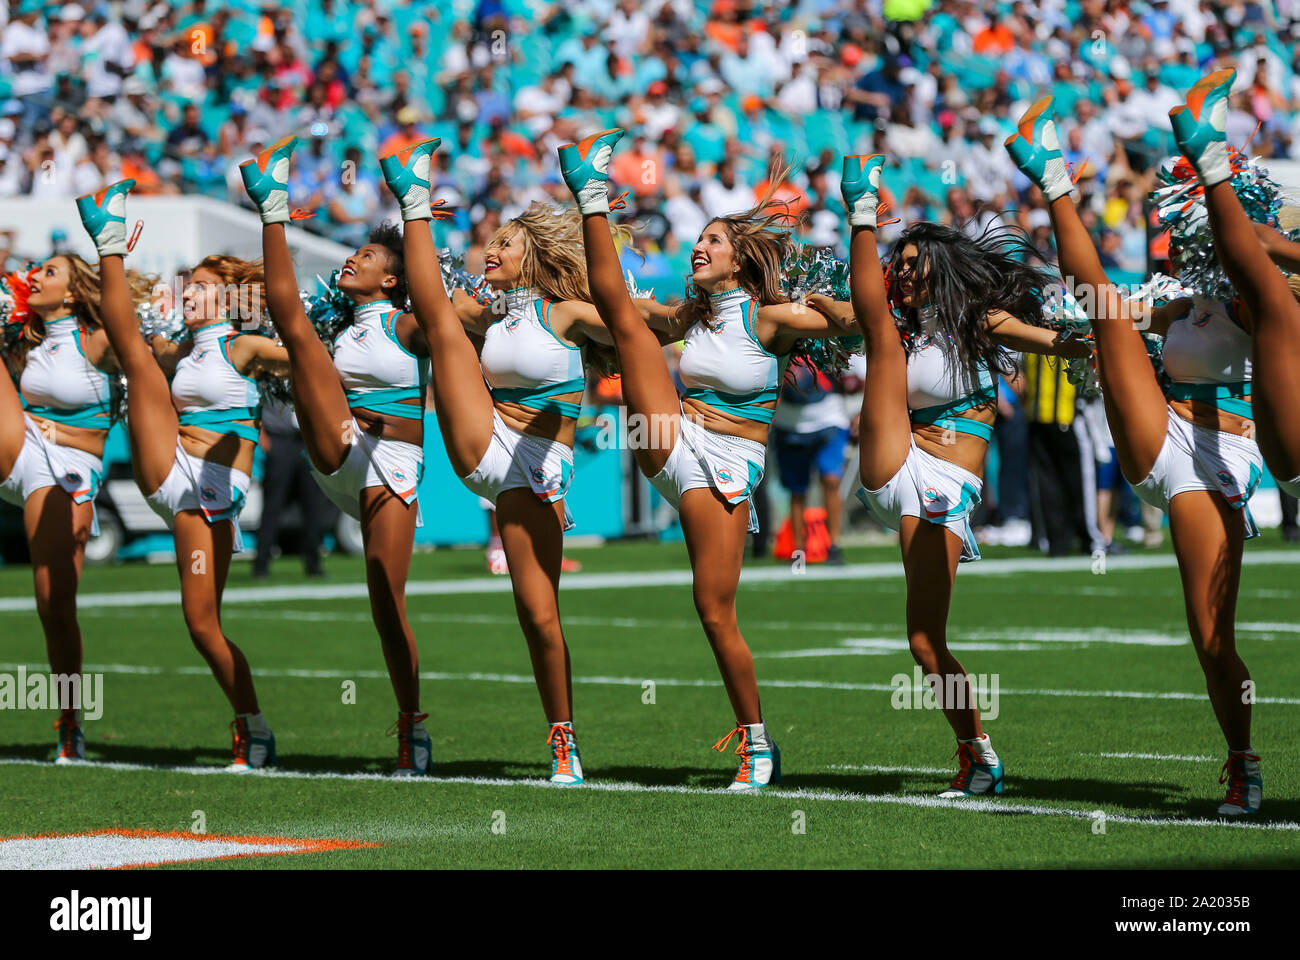 Miami Gardens, Florida, USA. 29th Sep, 2019. The Miami Dolphins cheerleaders perform during an NFL football game between Los Angeles Chargers and the Miami Dolphins at the Hard Rock Stadium in Miami Gardens, Florida. Credit: Mario Houben/ZUMA Wire/Alamy Live News Stock Photo